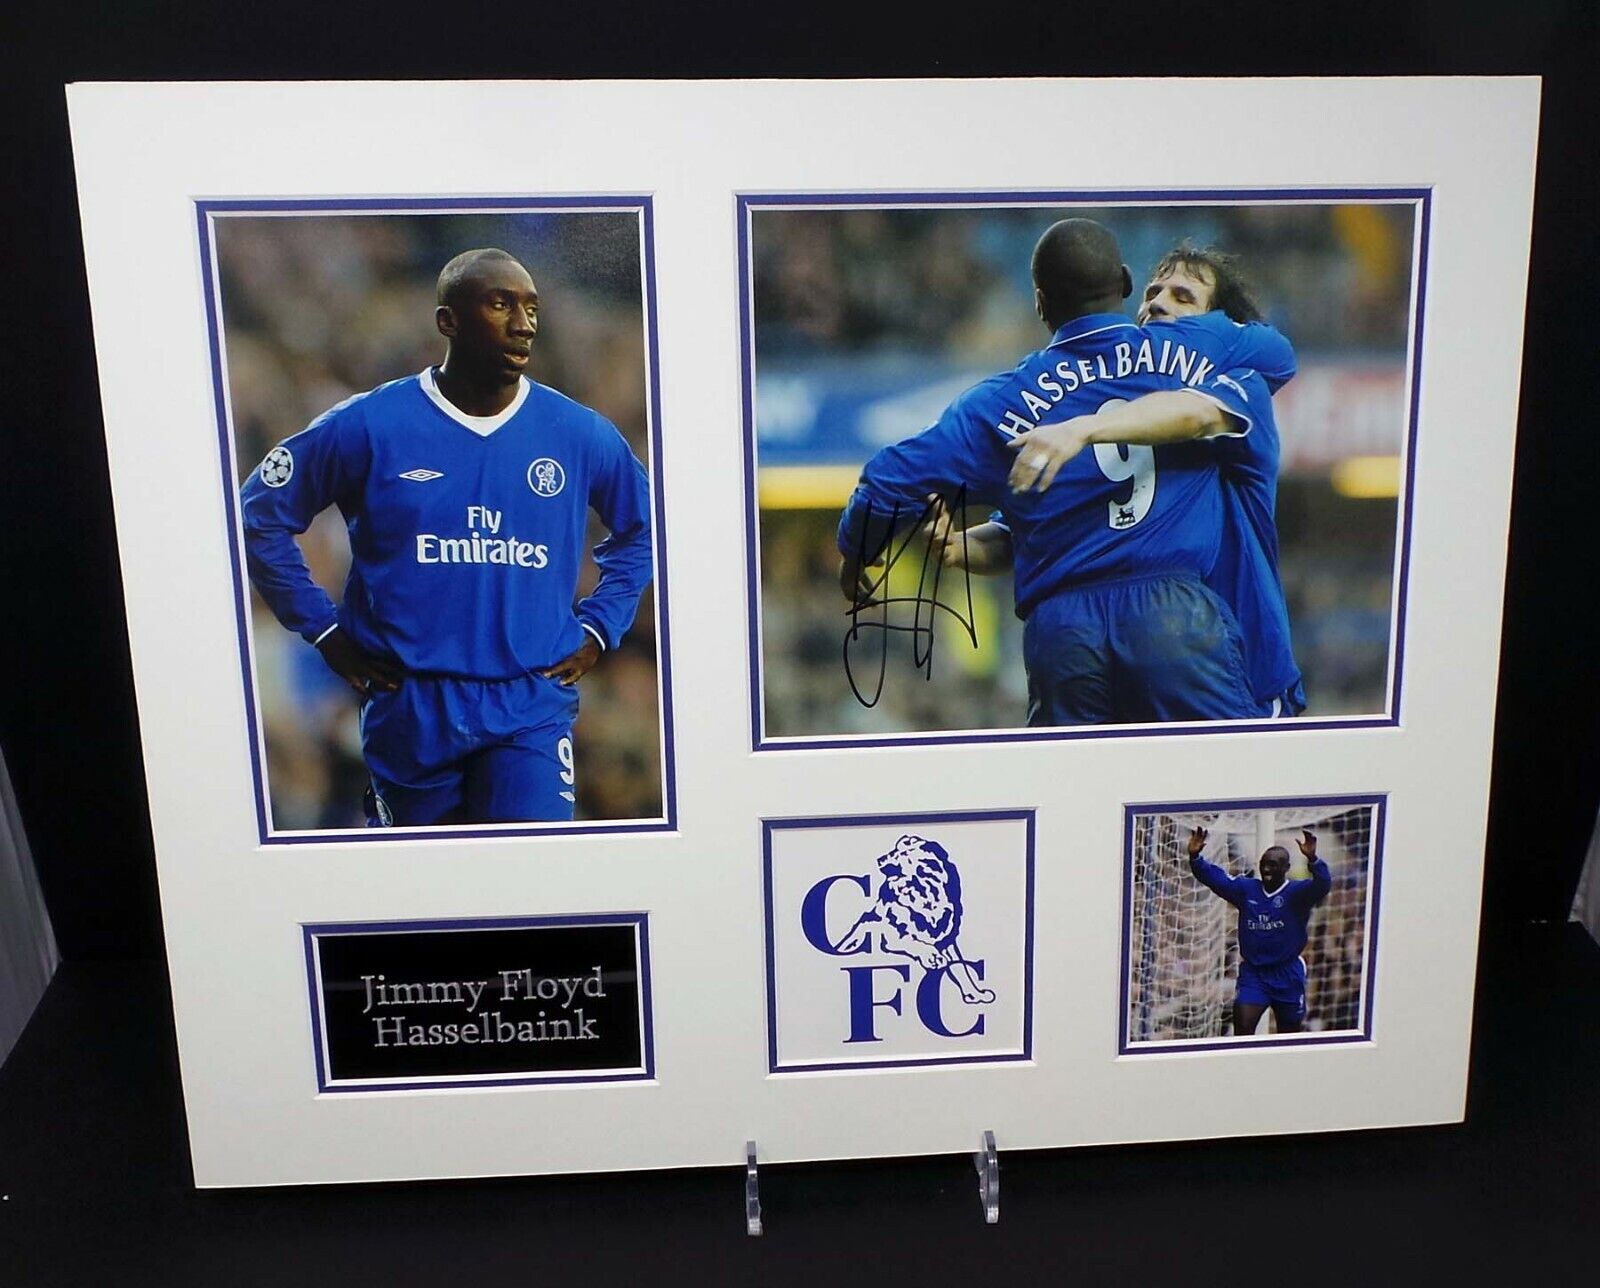 Jimmy Floyd HASSELBAINK Signed & Mounted Chelsea Photo Poster painting HUGE Display AFTAL RD COA